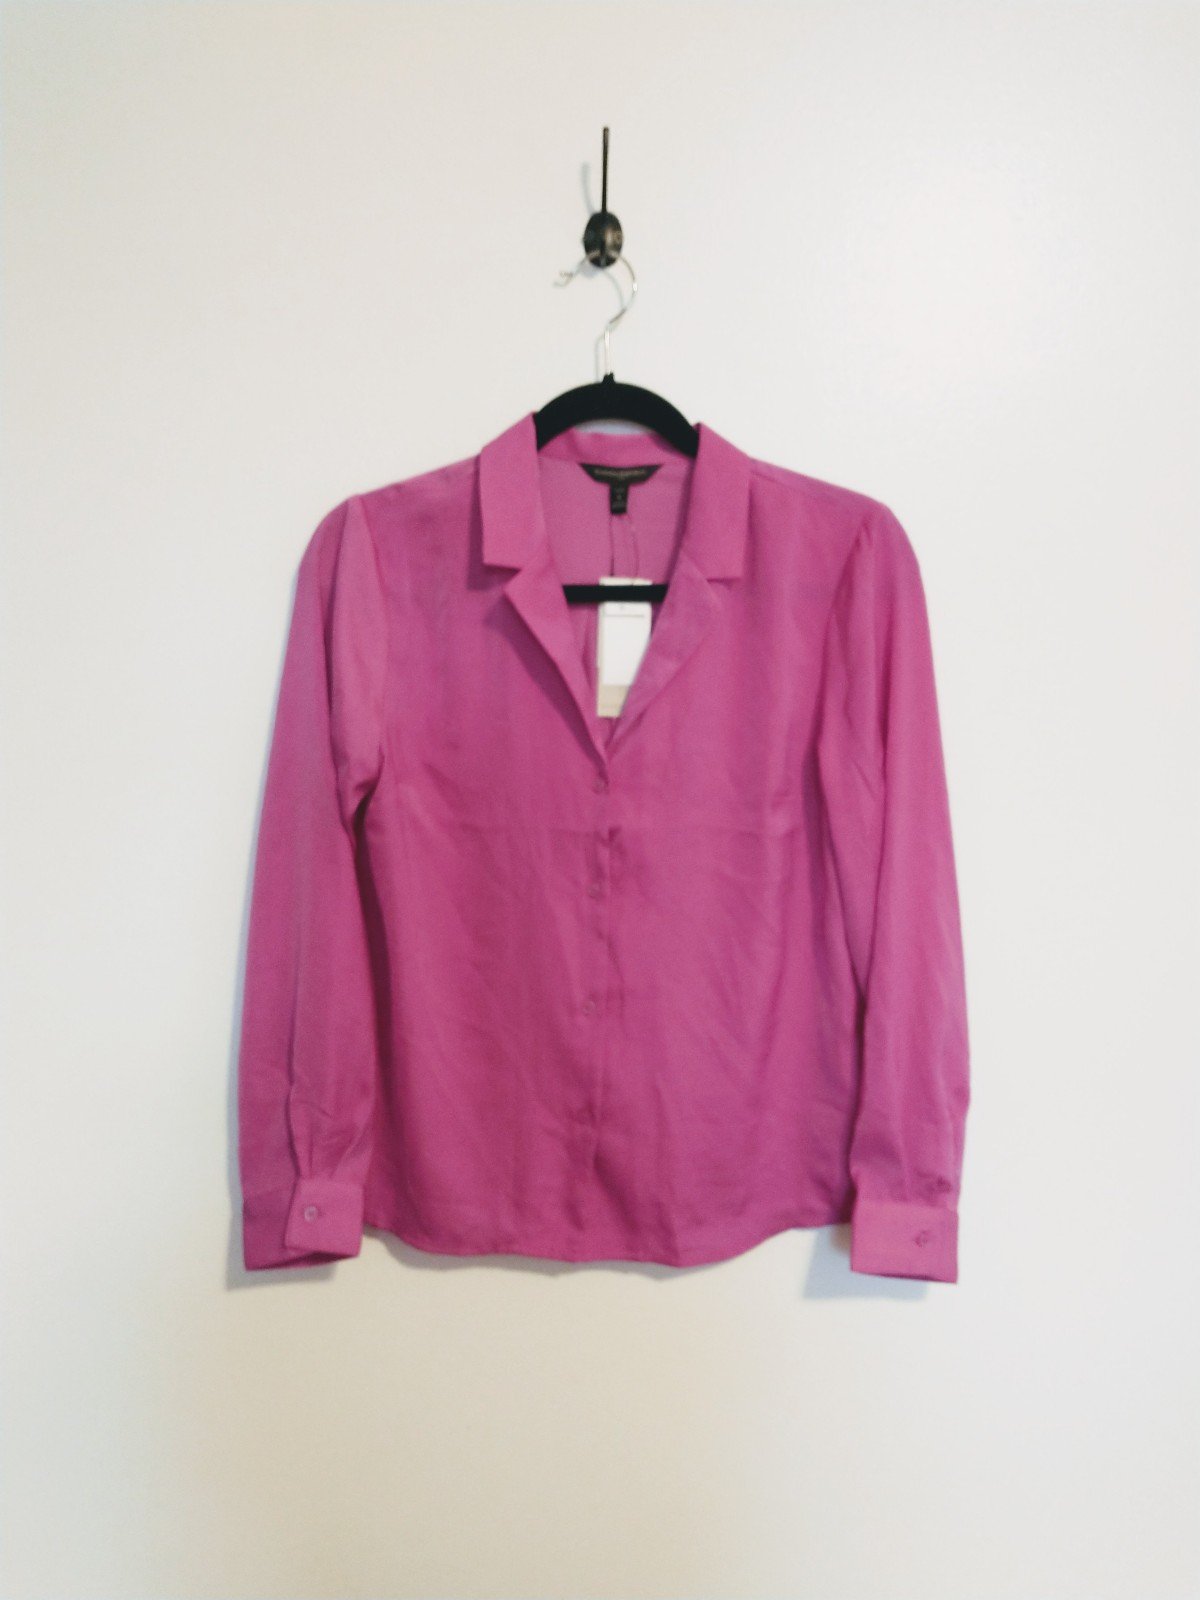 High quality NWT Banana Republic pink button up blouse 